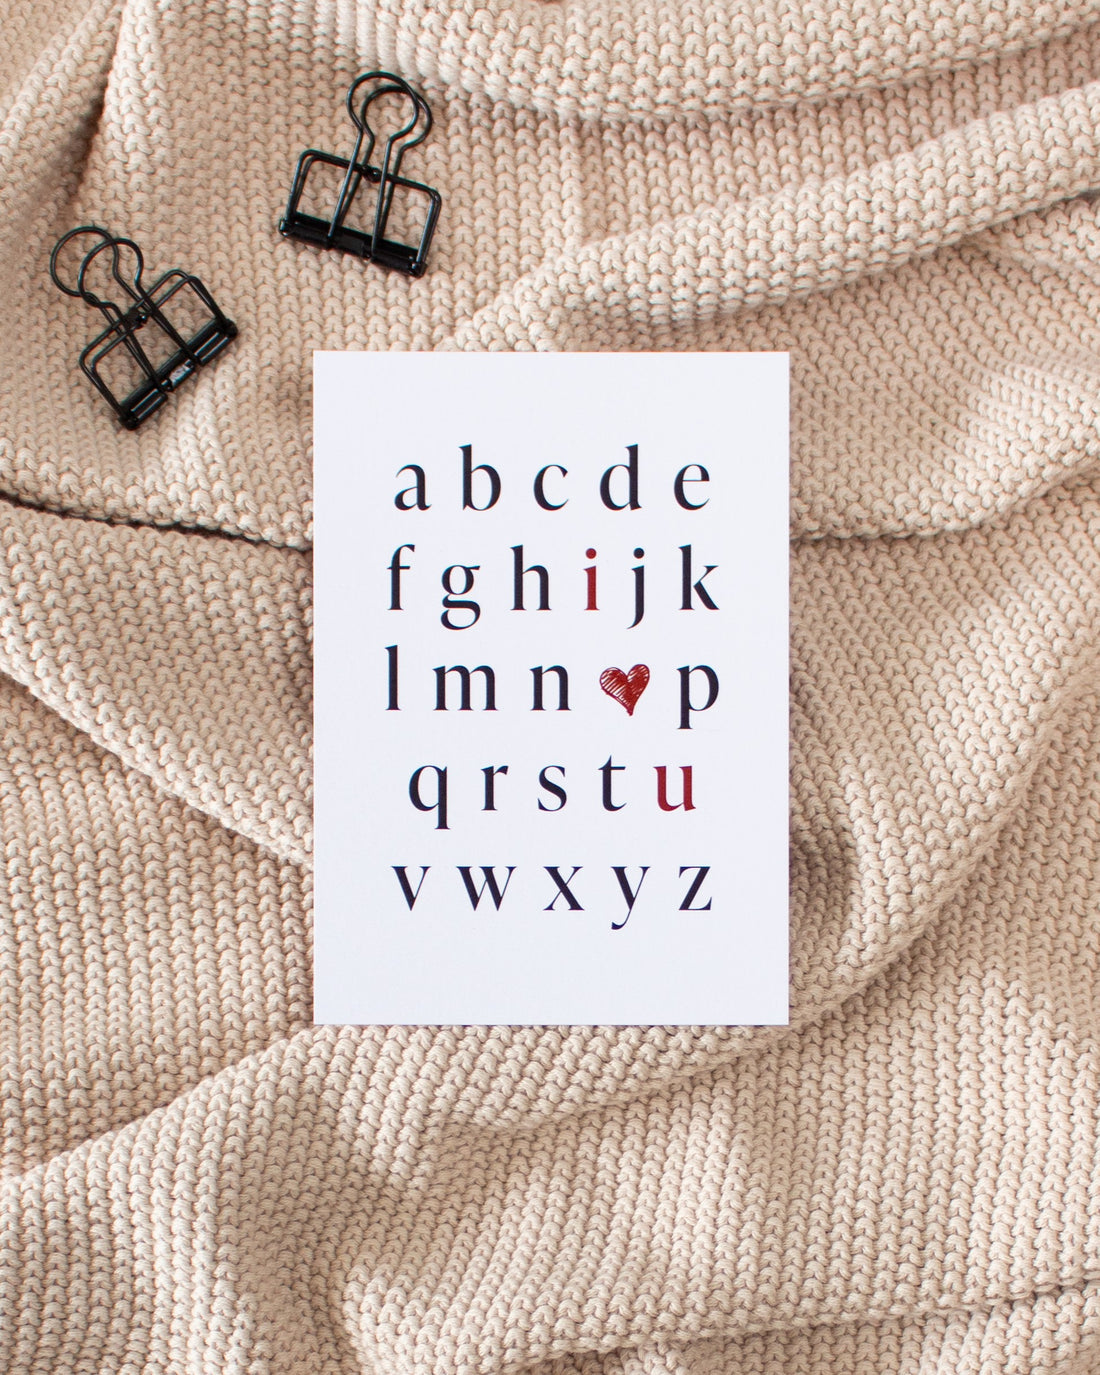 A postcard laying on a beige knitted blanket with some black binder clips. The postcard design shows the alphabet in mostly black letters. The letters &quot;i&quot; and &quot;u&quot; are red. In place of the letter &quot;o&quot; there is a red heart. The letters are arranged in a way that the red letters and heart read &quot;I love you&quot;.